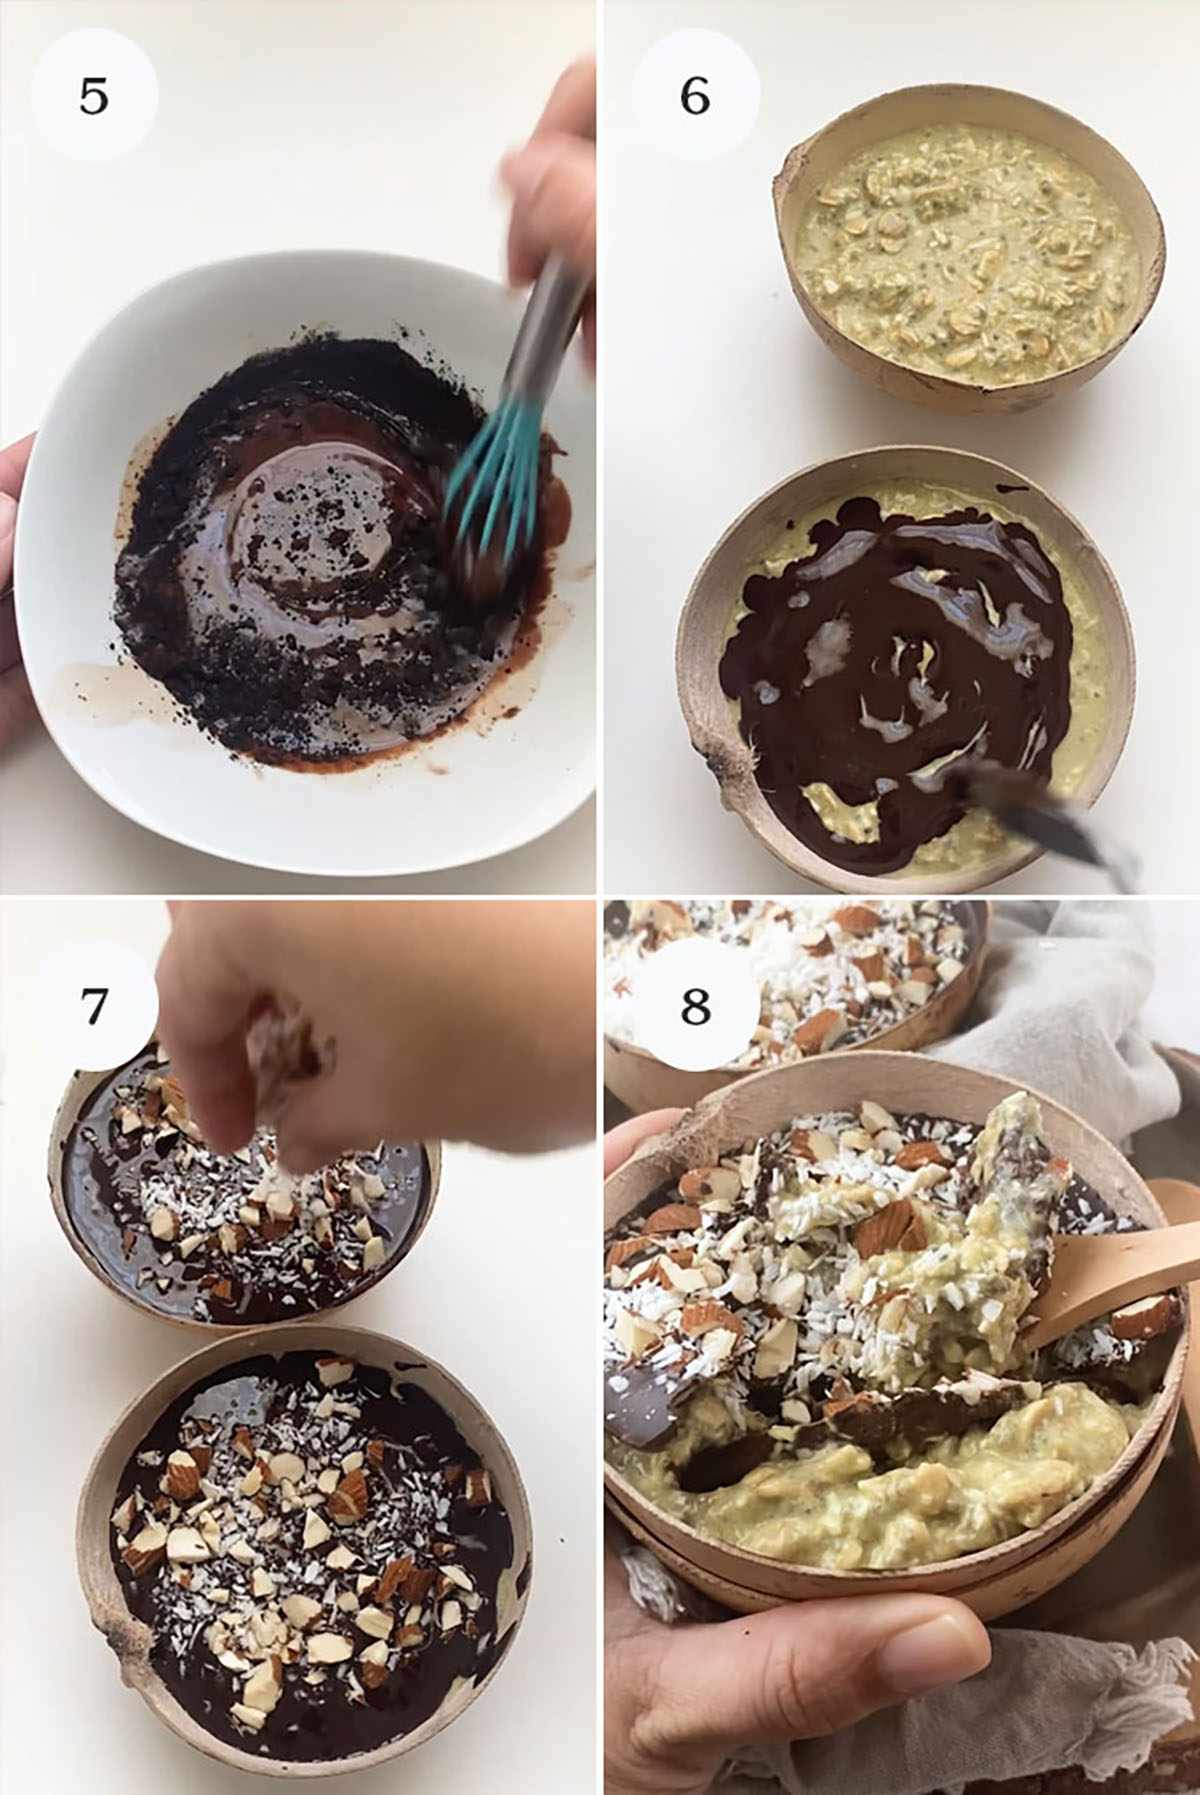 4 photo collage of adding chocolate and toppings to overnight oats.